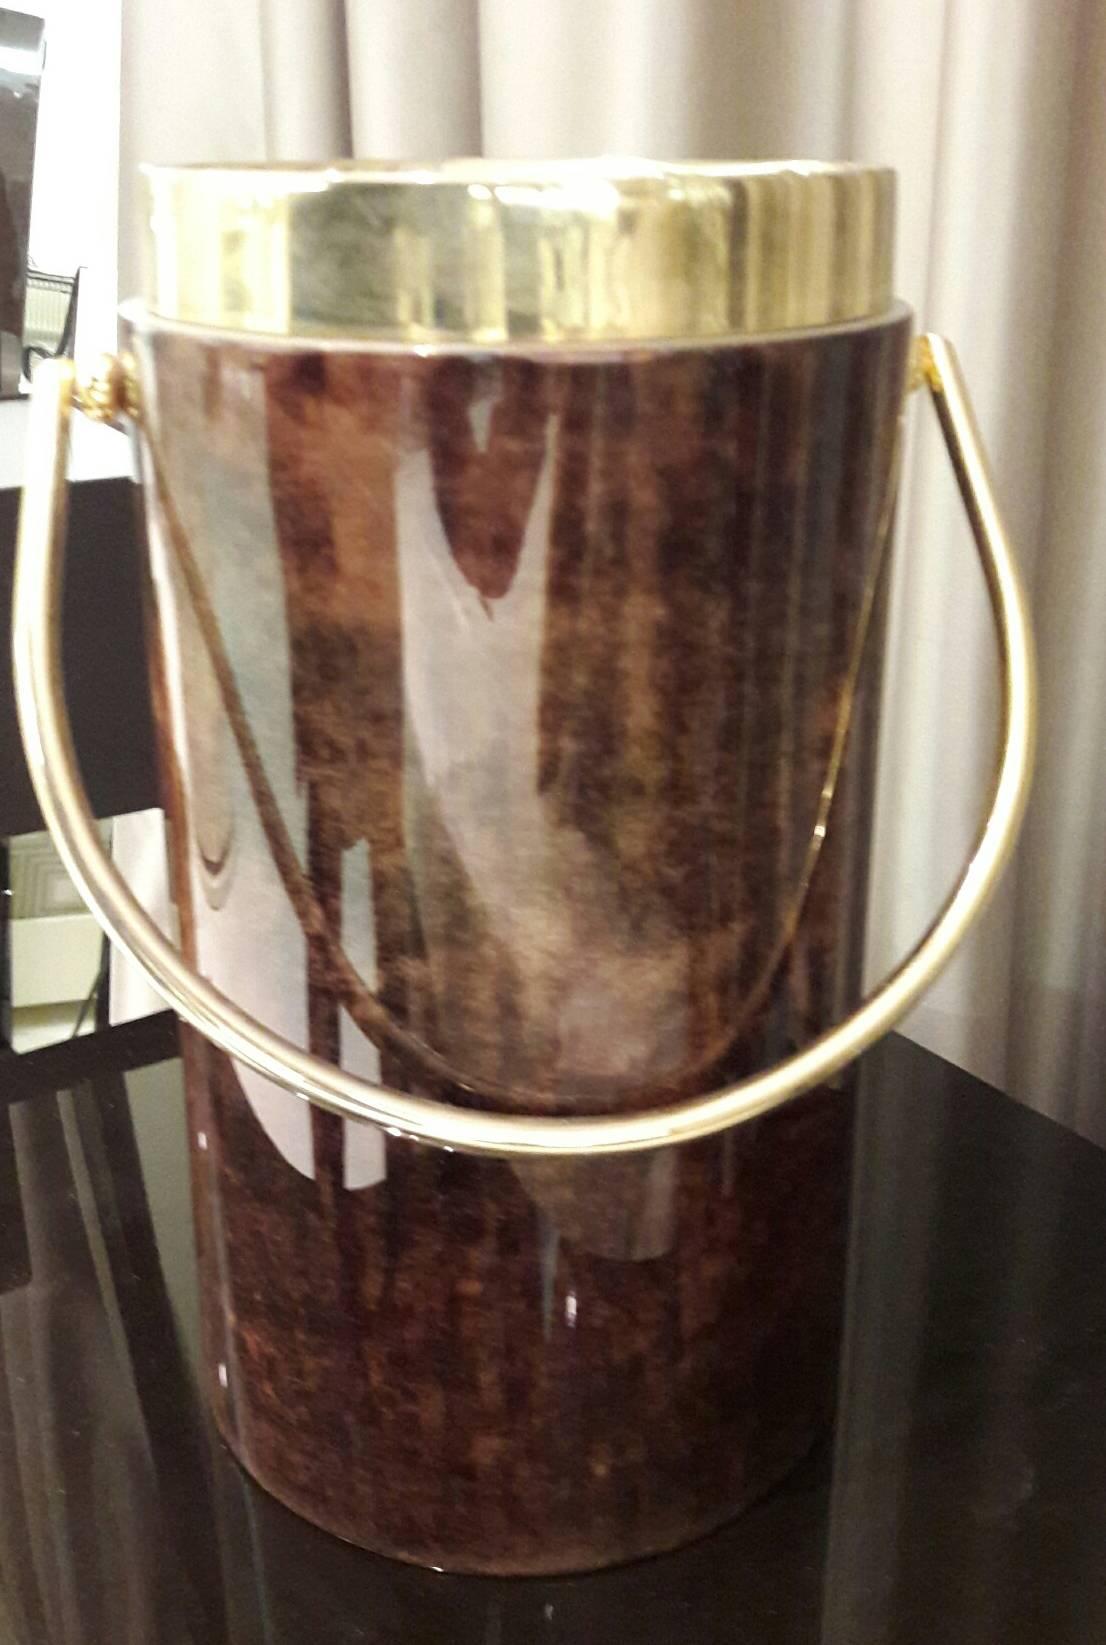 This very nice ice bucket is finished in goatskin col tabacco, high gloss.
With original brass details, unfortunately damaged as you can see in the photo.
Cover top not available.
 